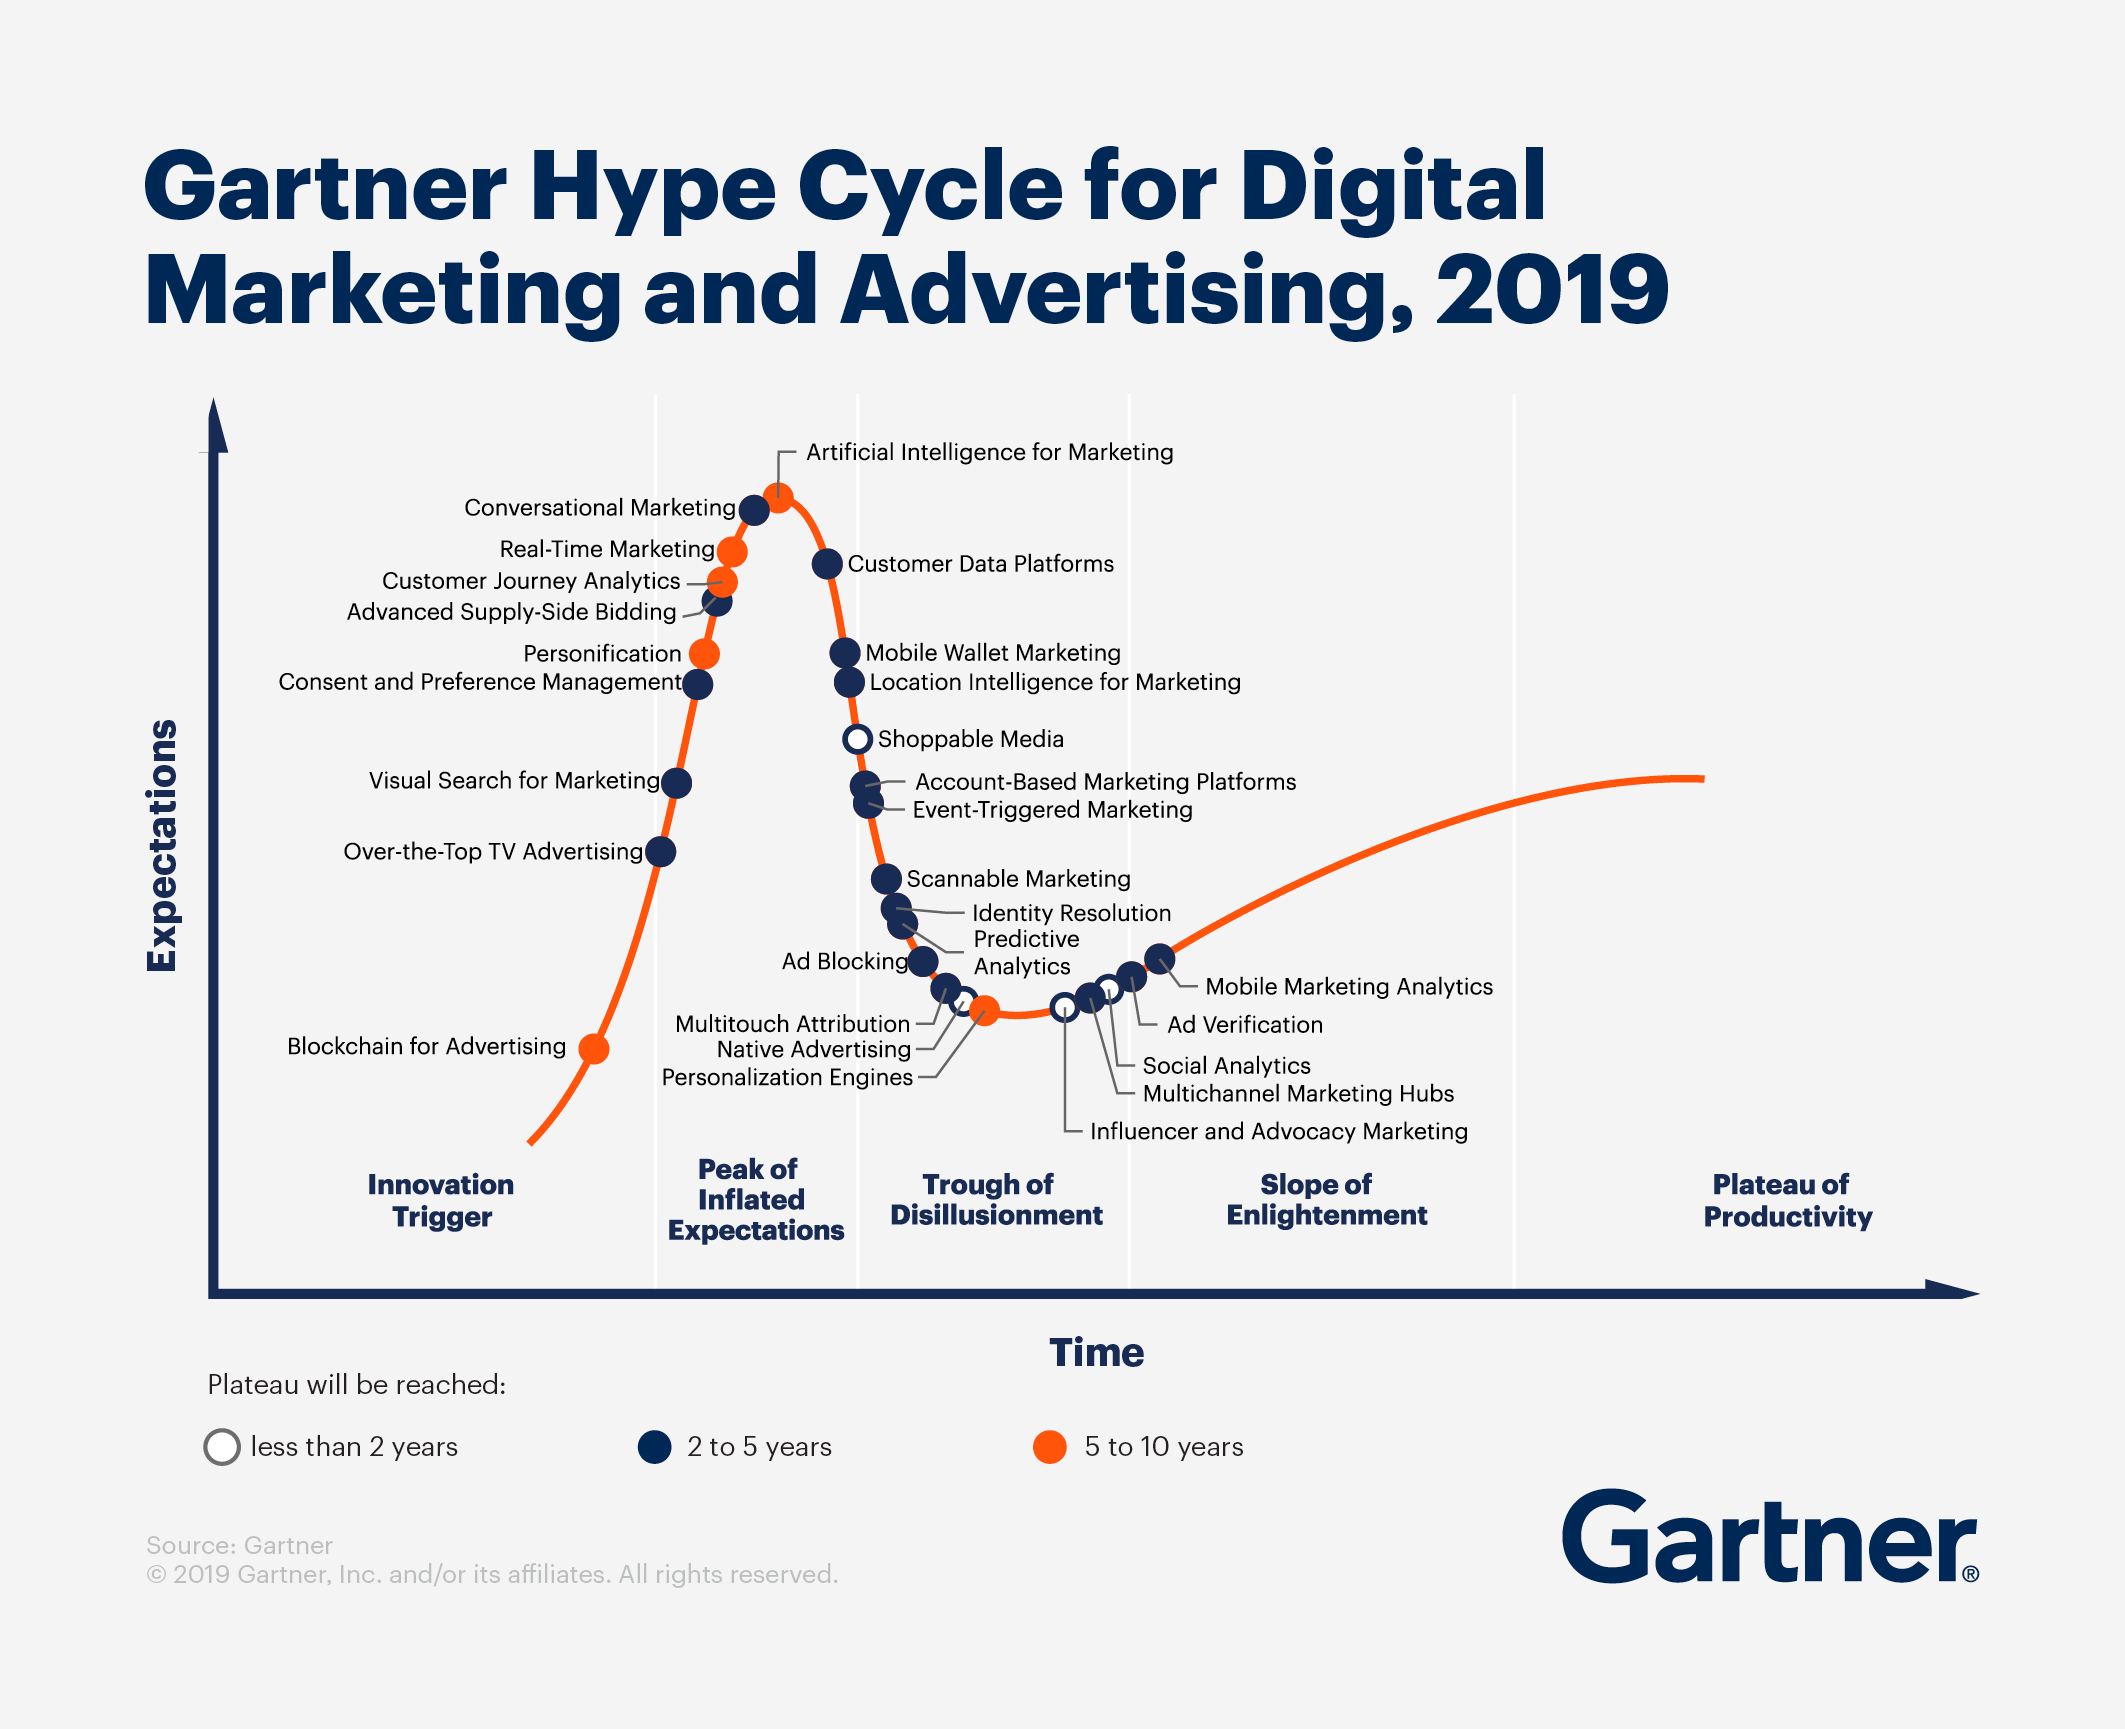 The Marketing Hype Cycle, positioning more and more data-related topics within reach in the coming few years.